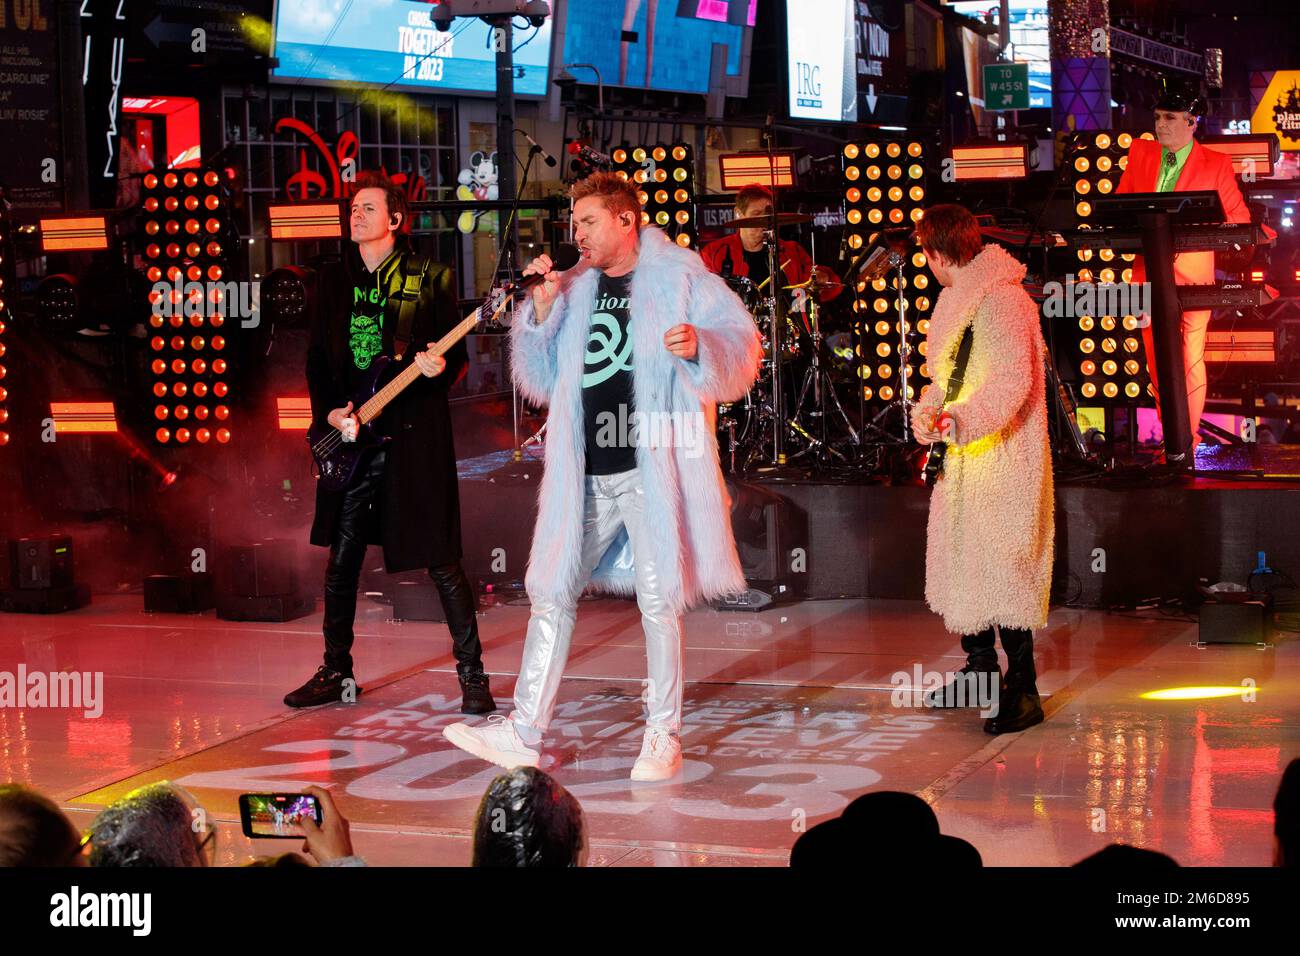 Duran Duran lead singer Simon Le Bon performs with the band during the